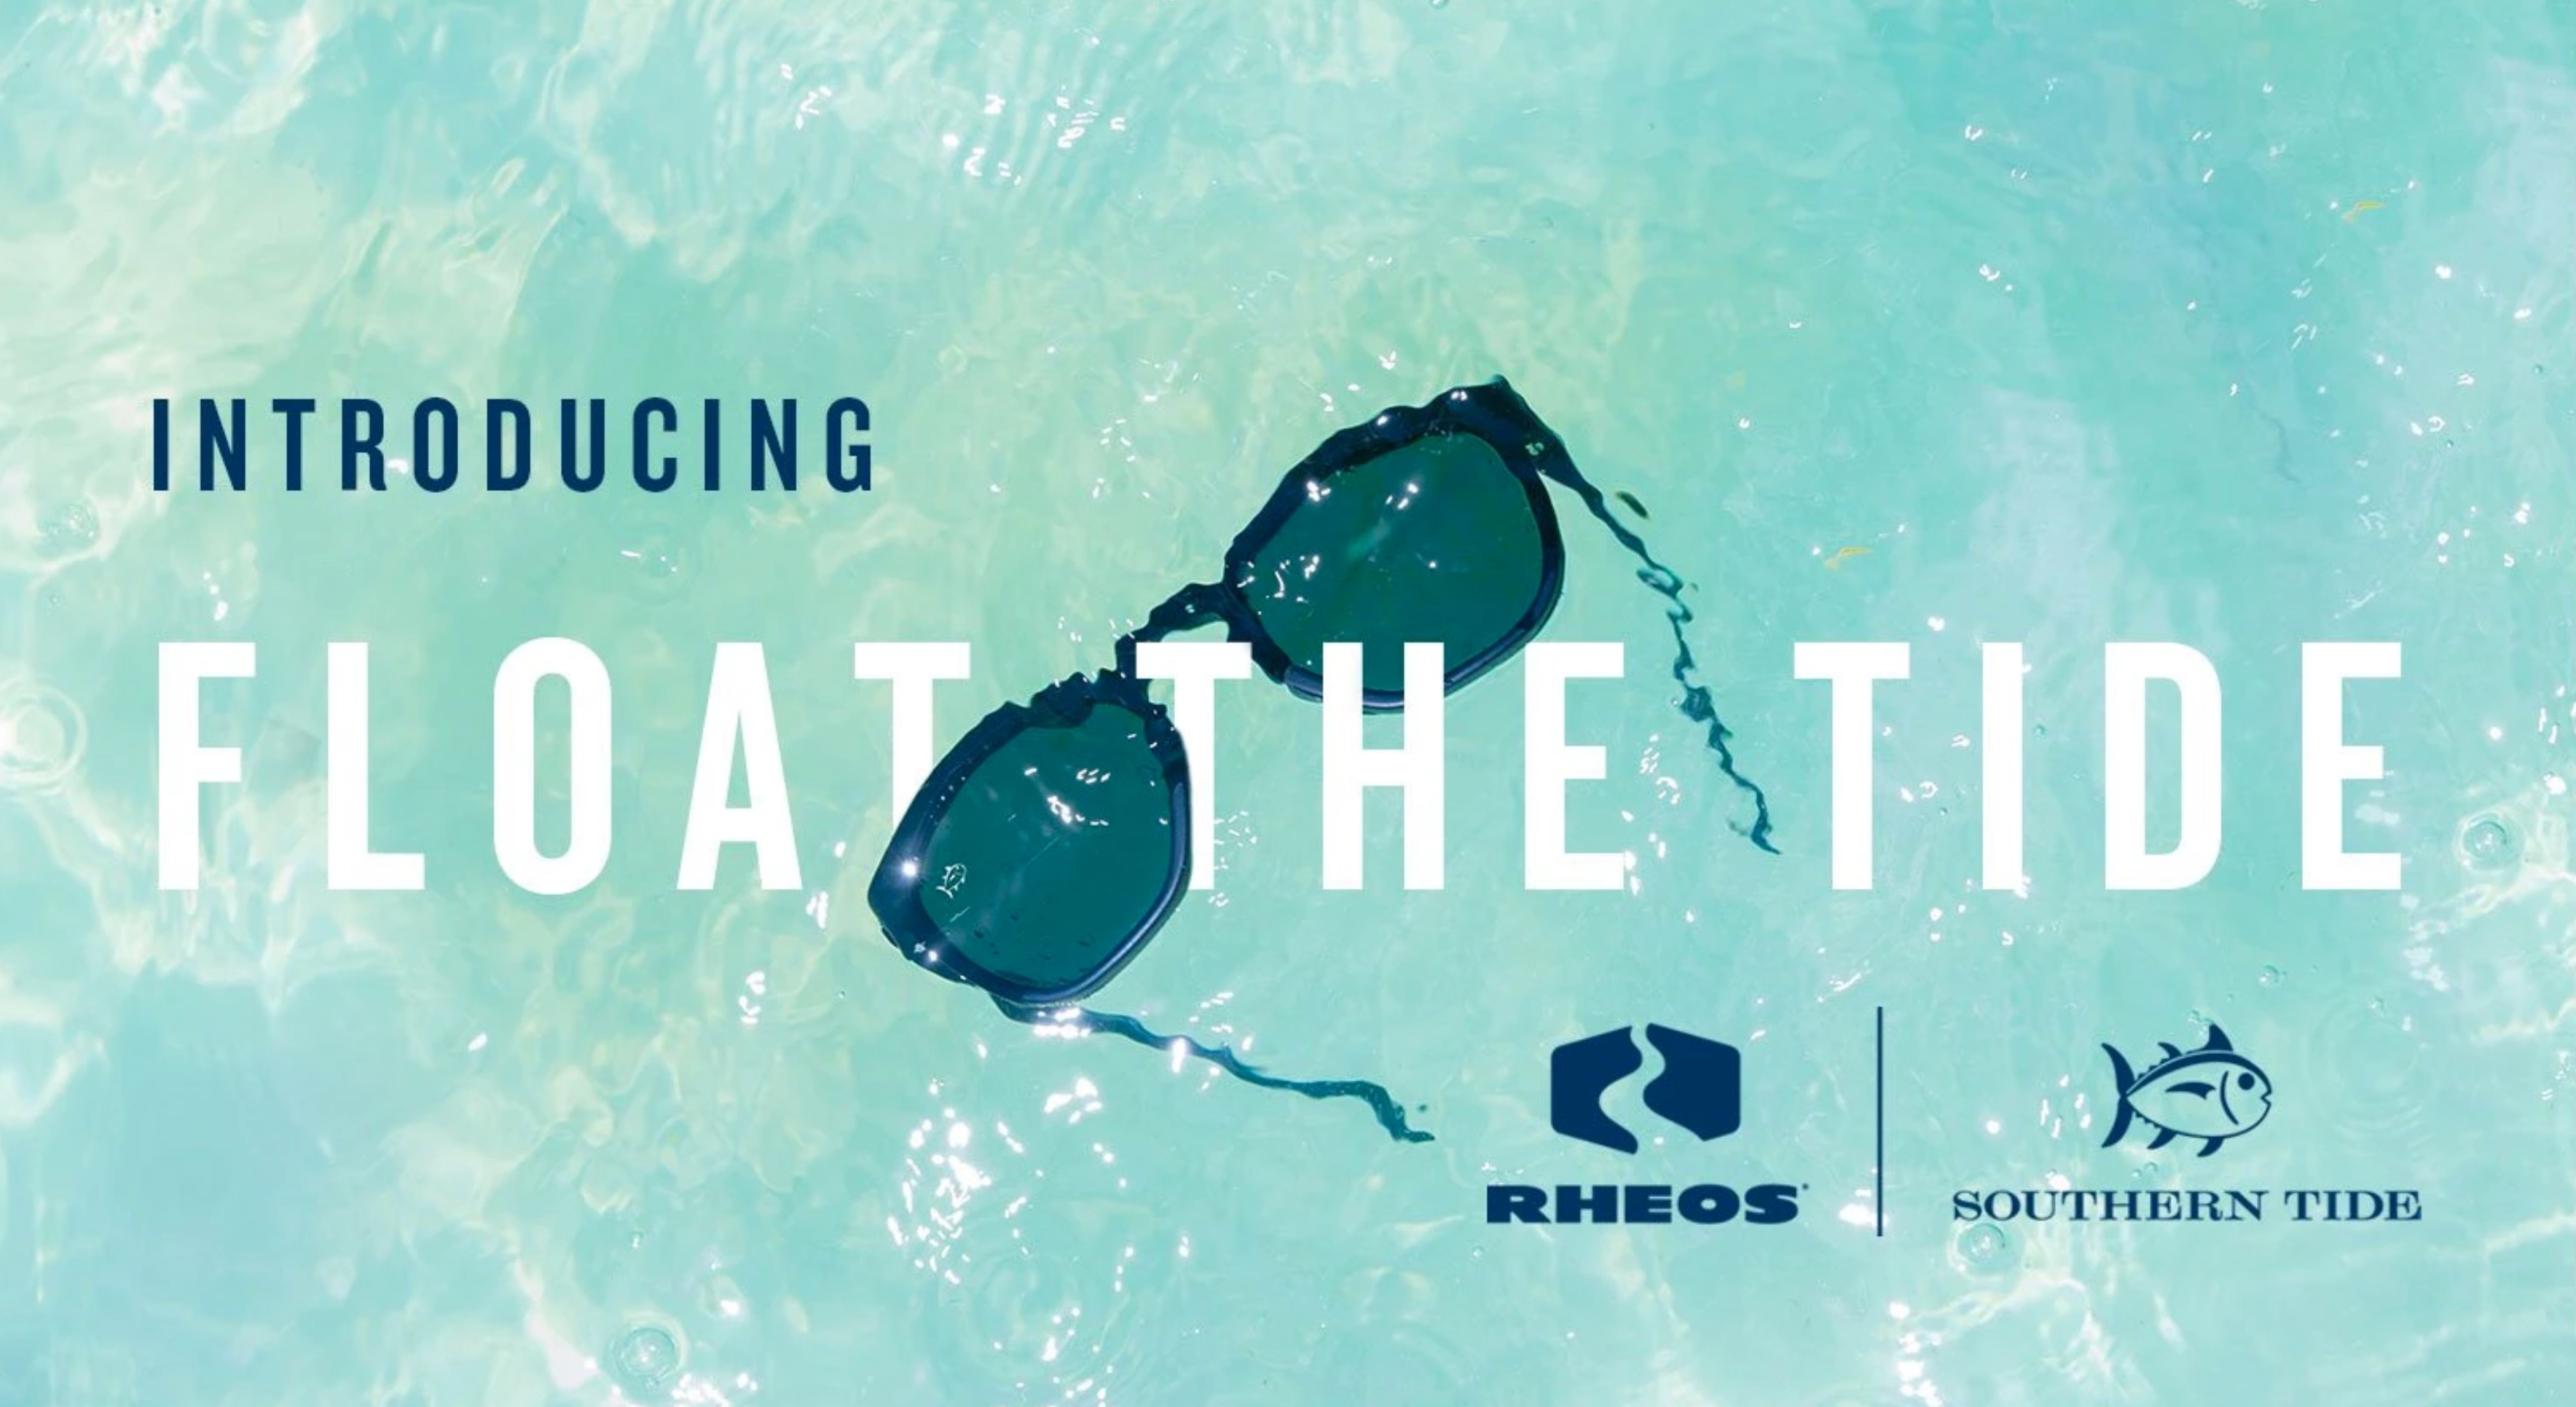 Southern Tide and Rheos offer new floatable sunglasses - 9to5Toys